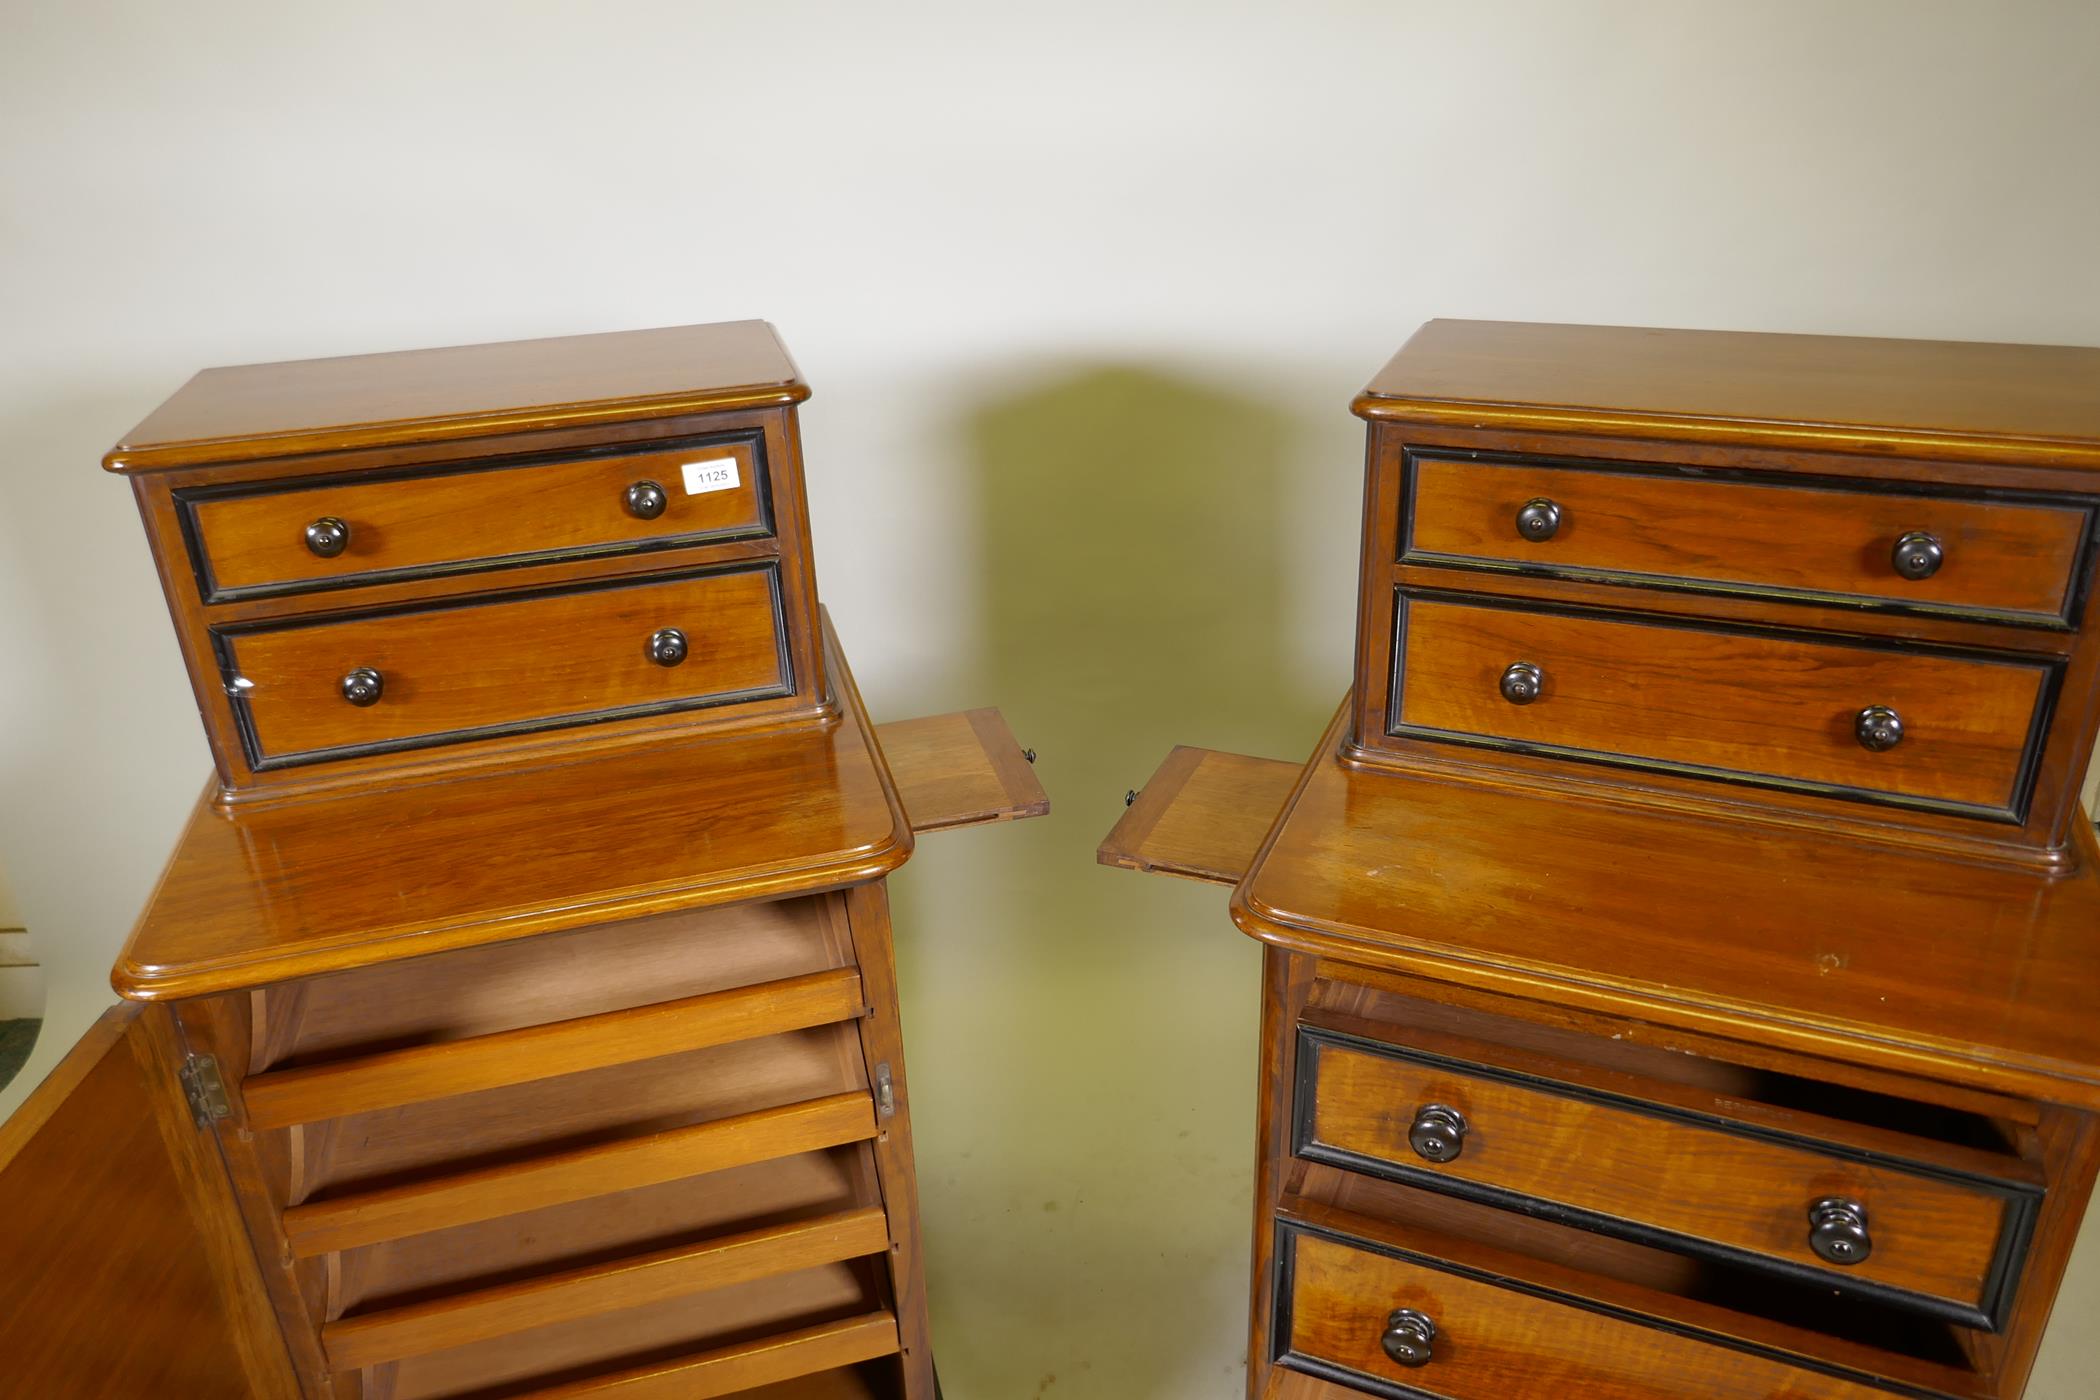 A pair of C19th walnut cabinets with ebony mouldings, one with six drawers, the other two drawers - Image 4 of 8